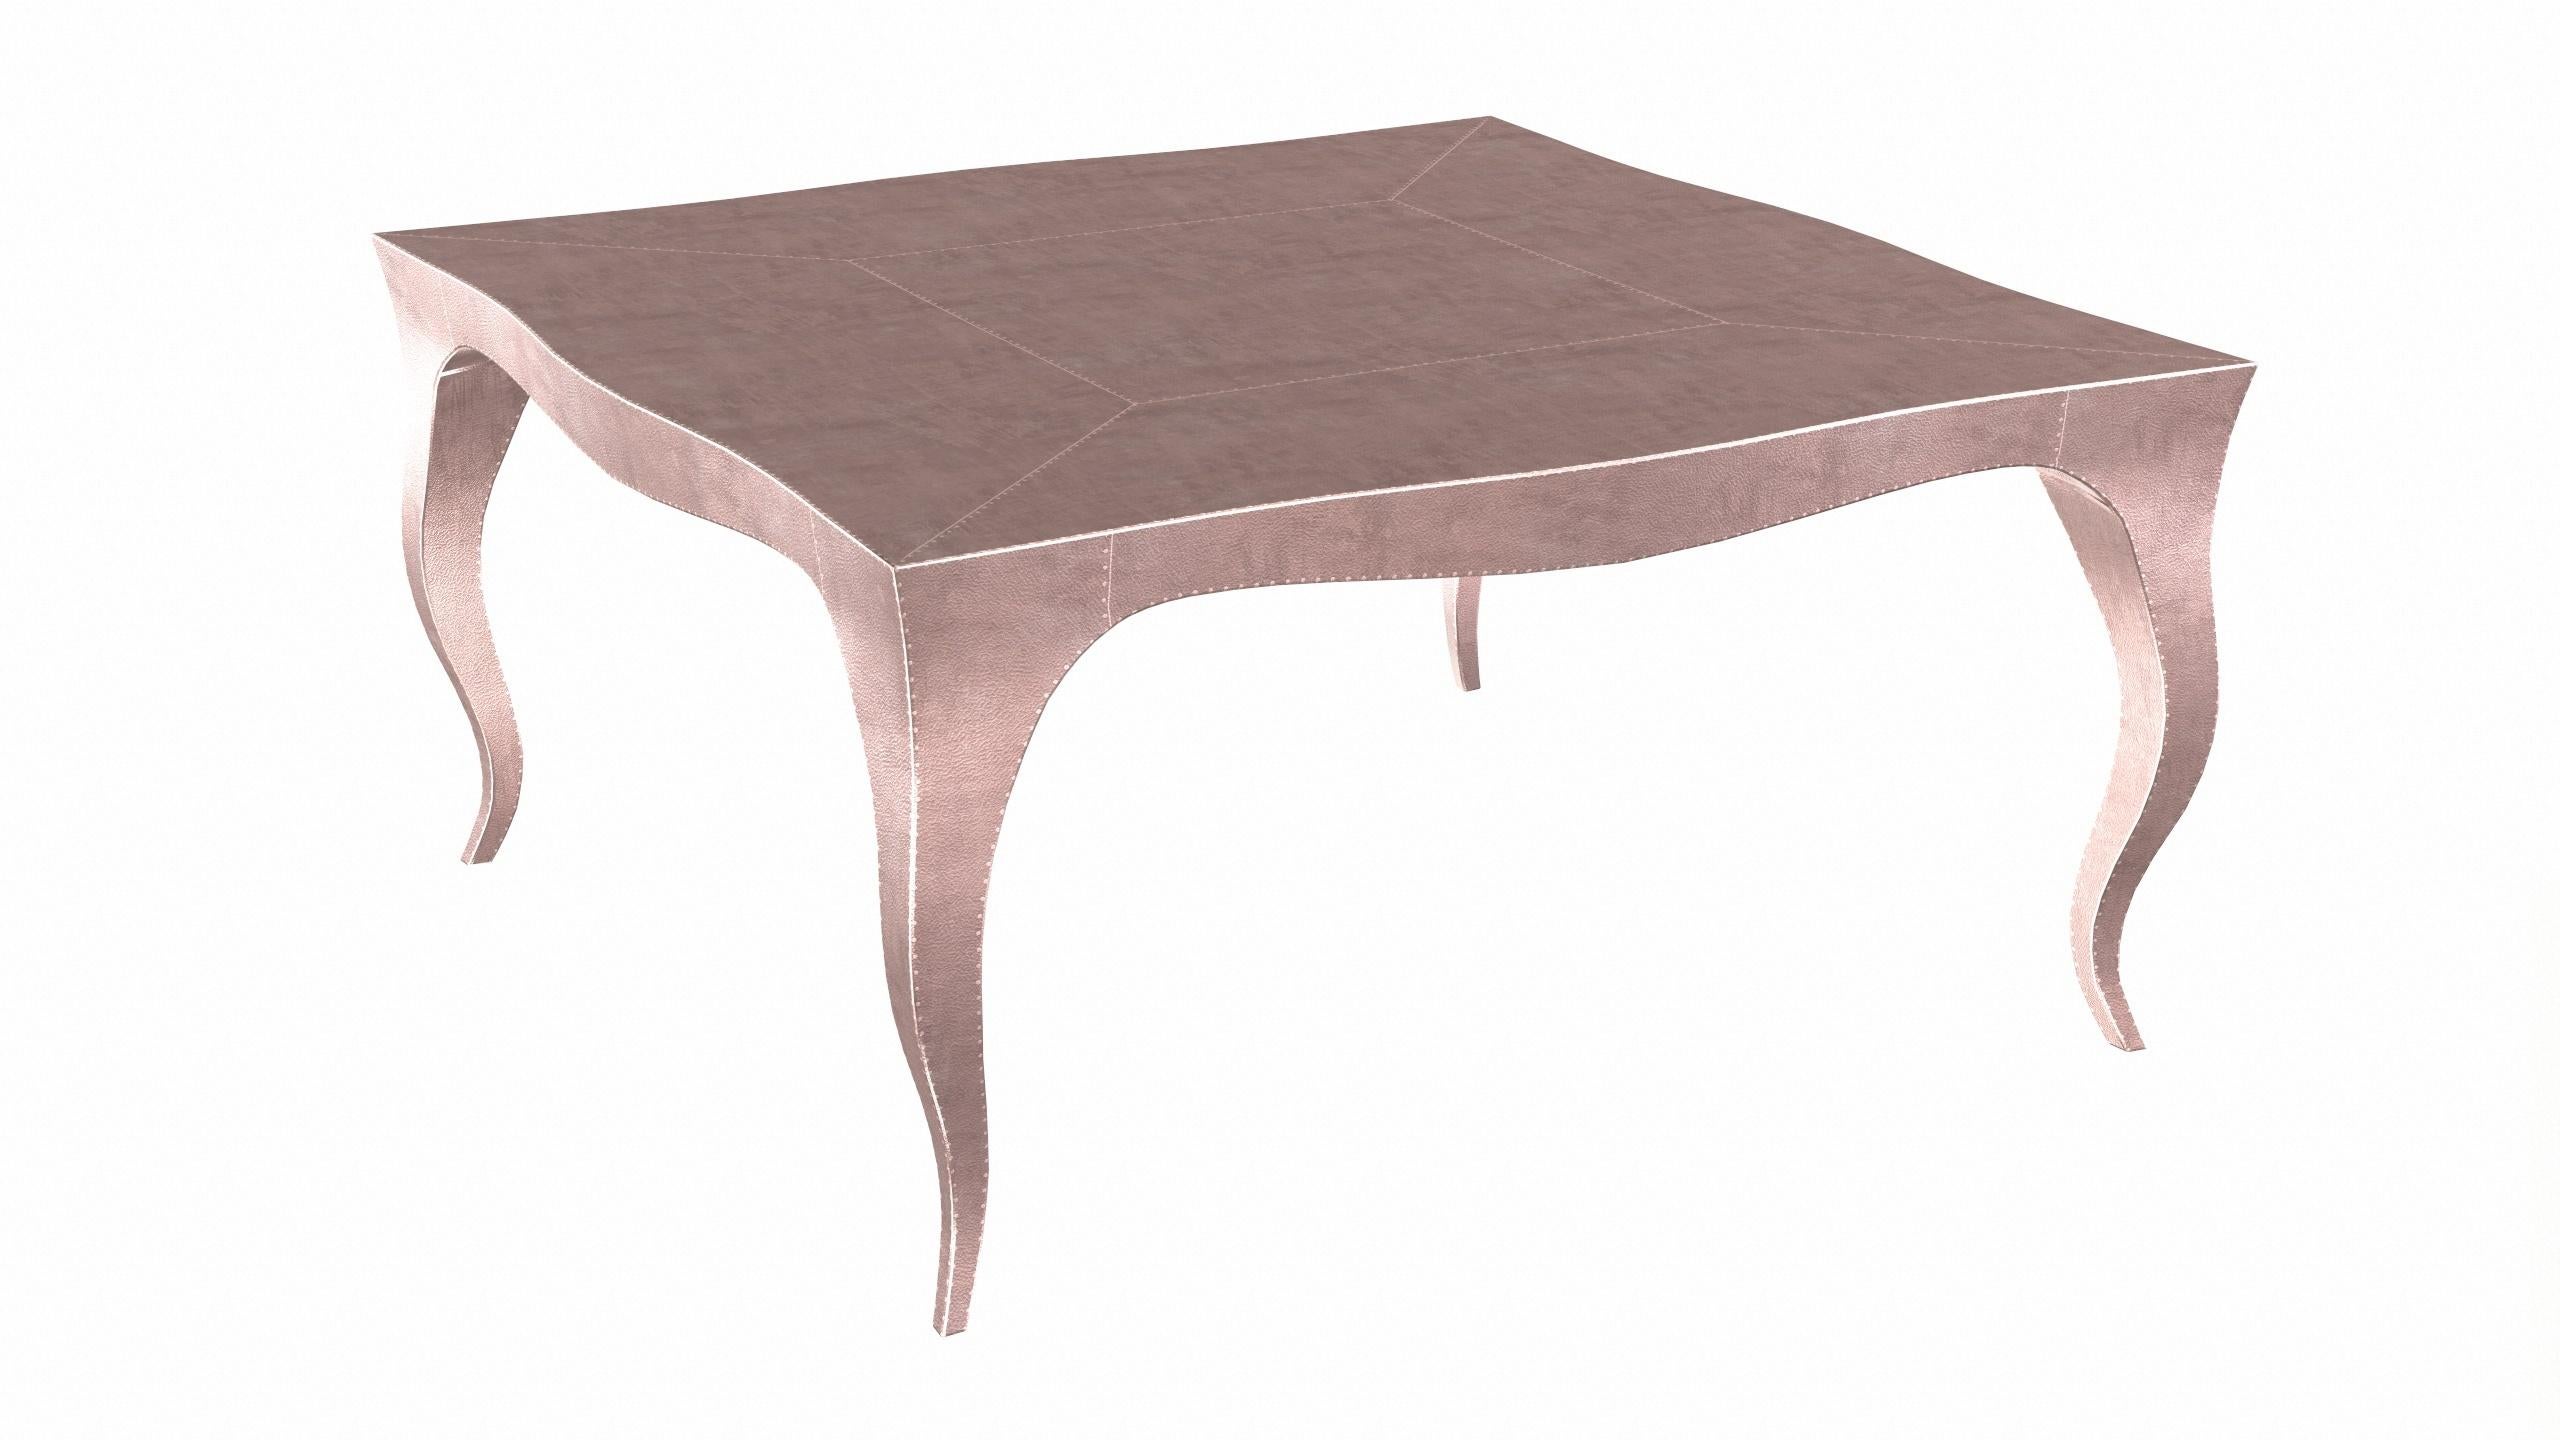 Other Louise Art Deco Coffee Tables Fine Hammered Copper 18.5x18.5x10 inch For Sale